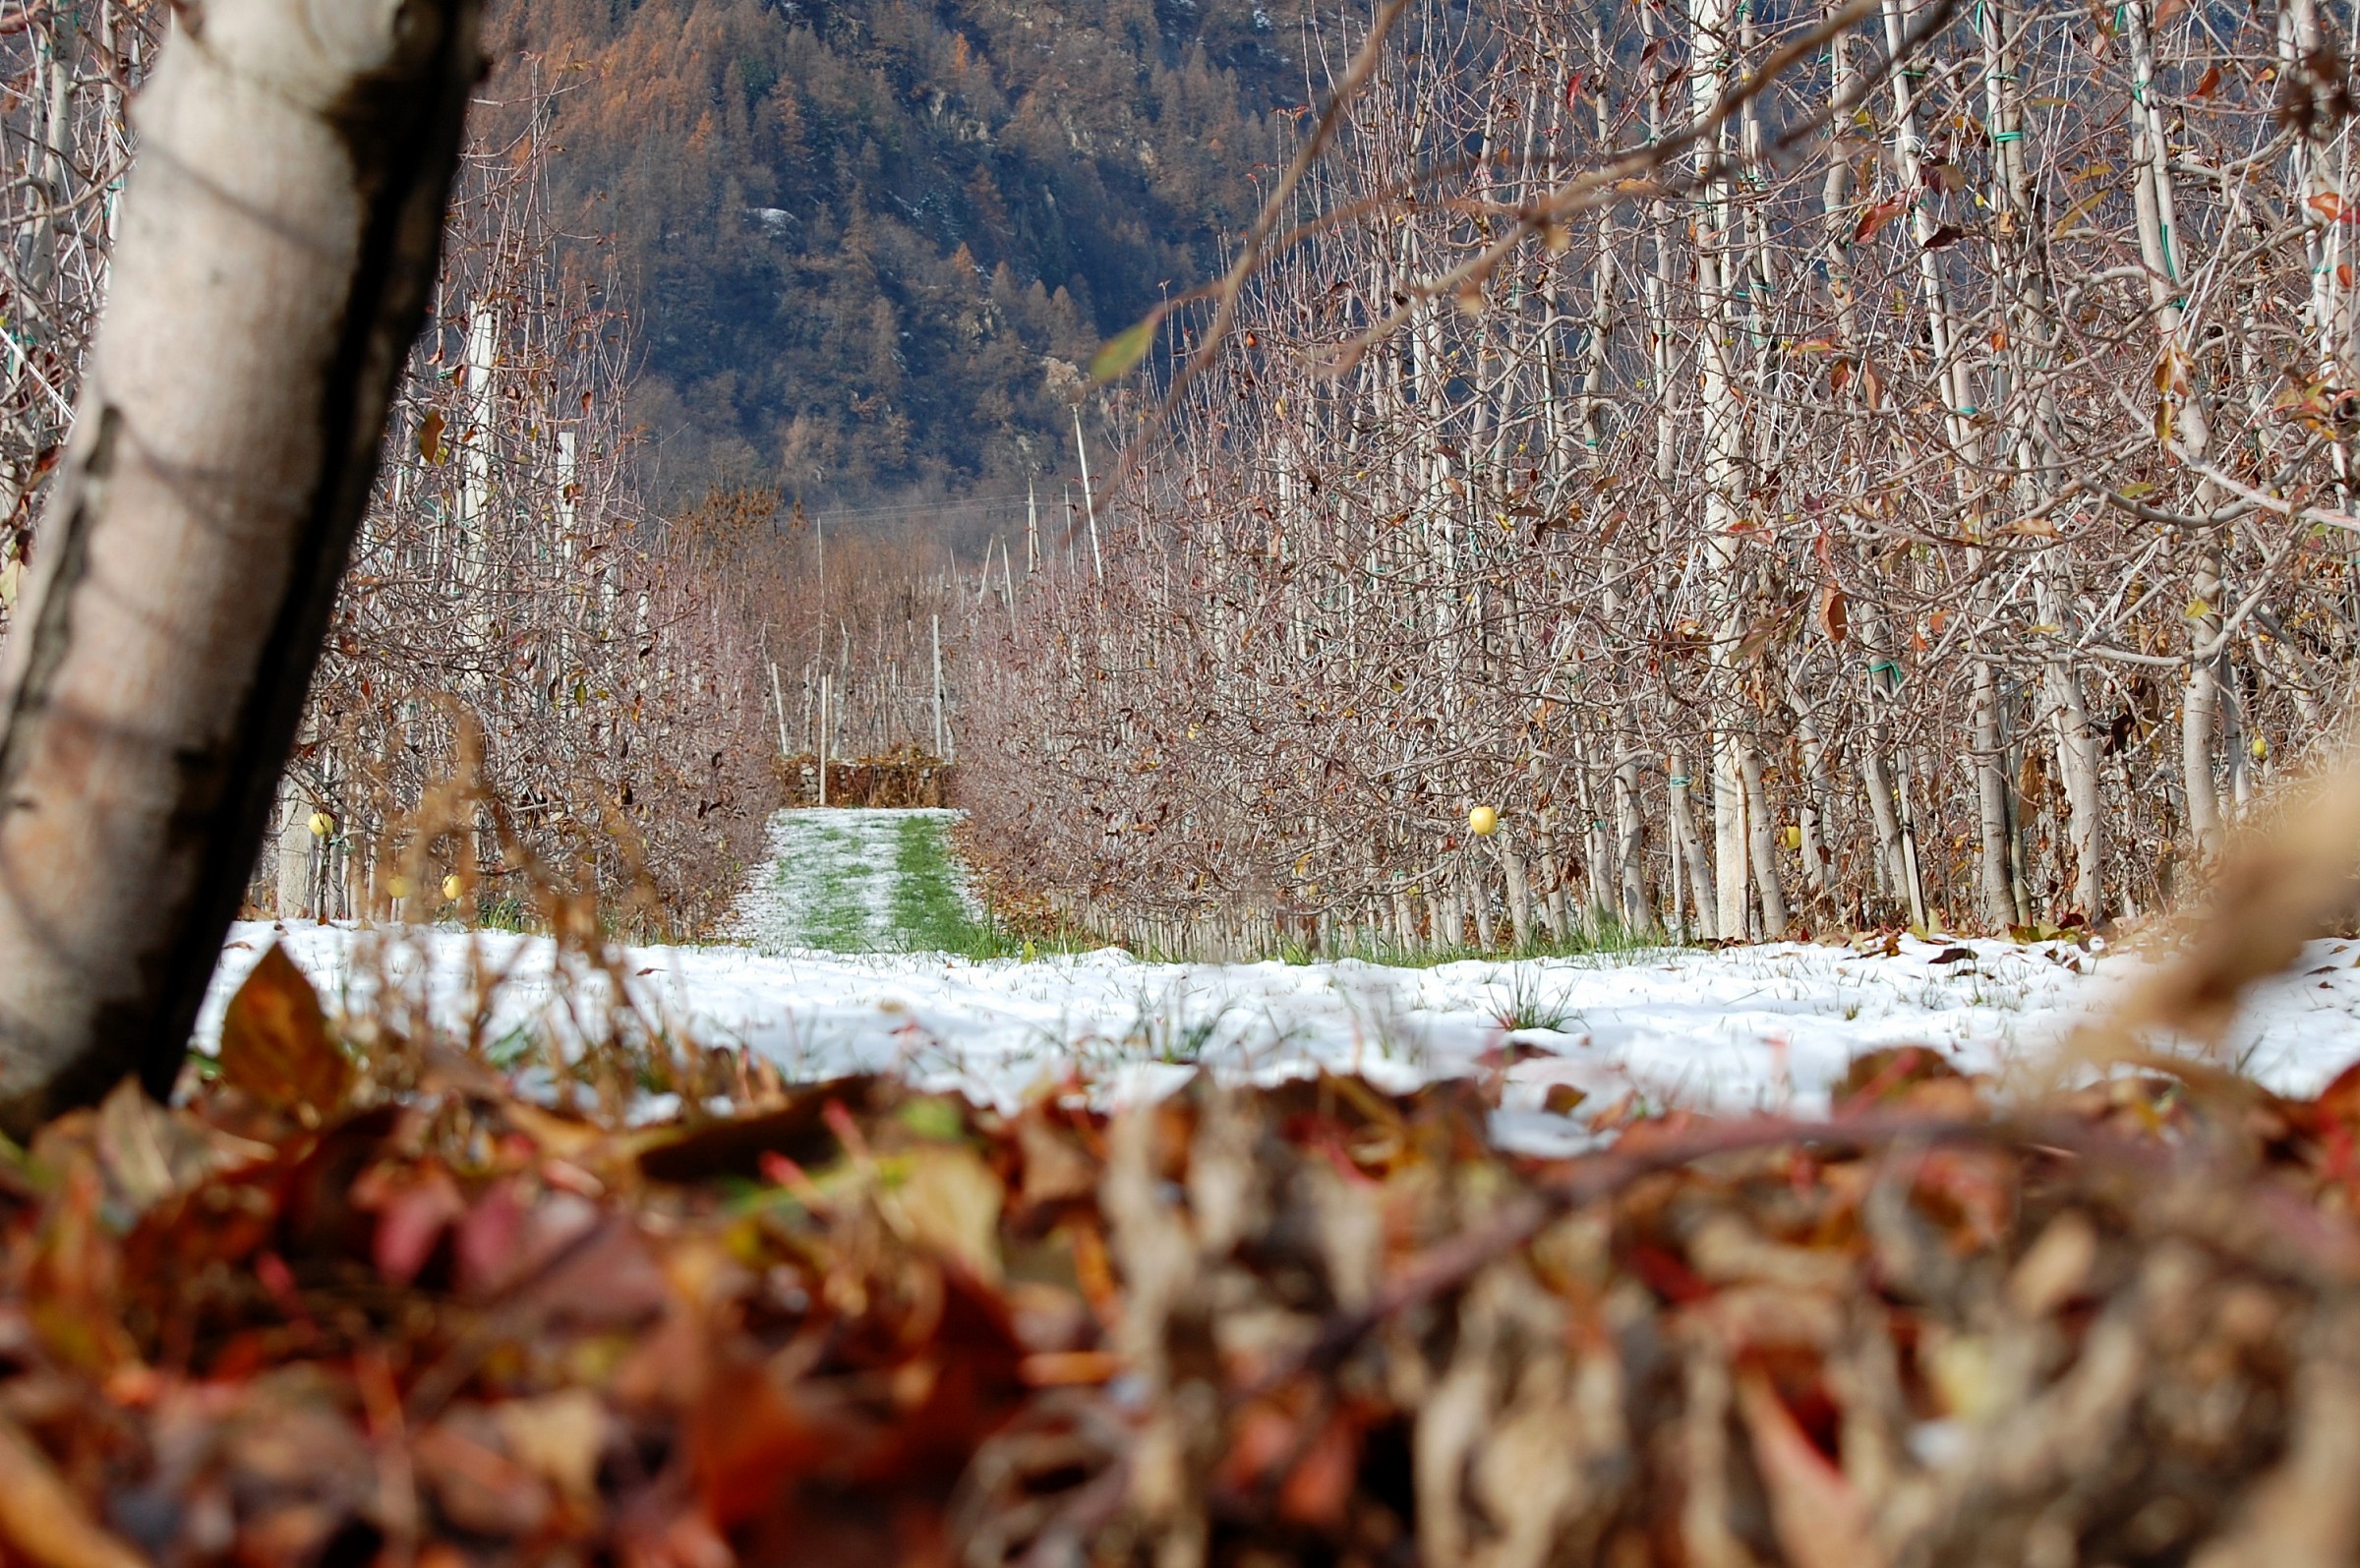 The apple orchards lie in the long winter pontasco...